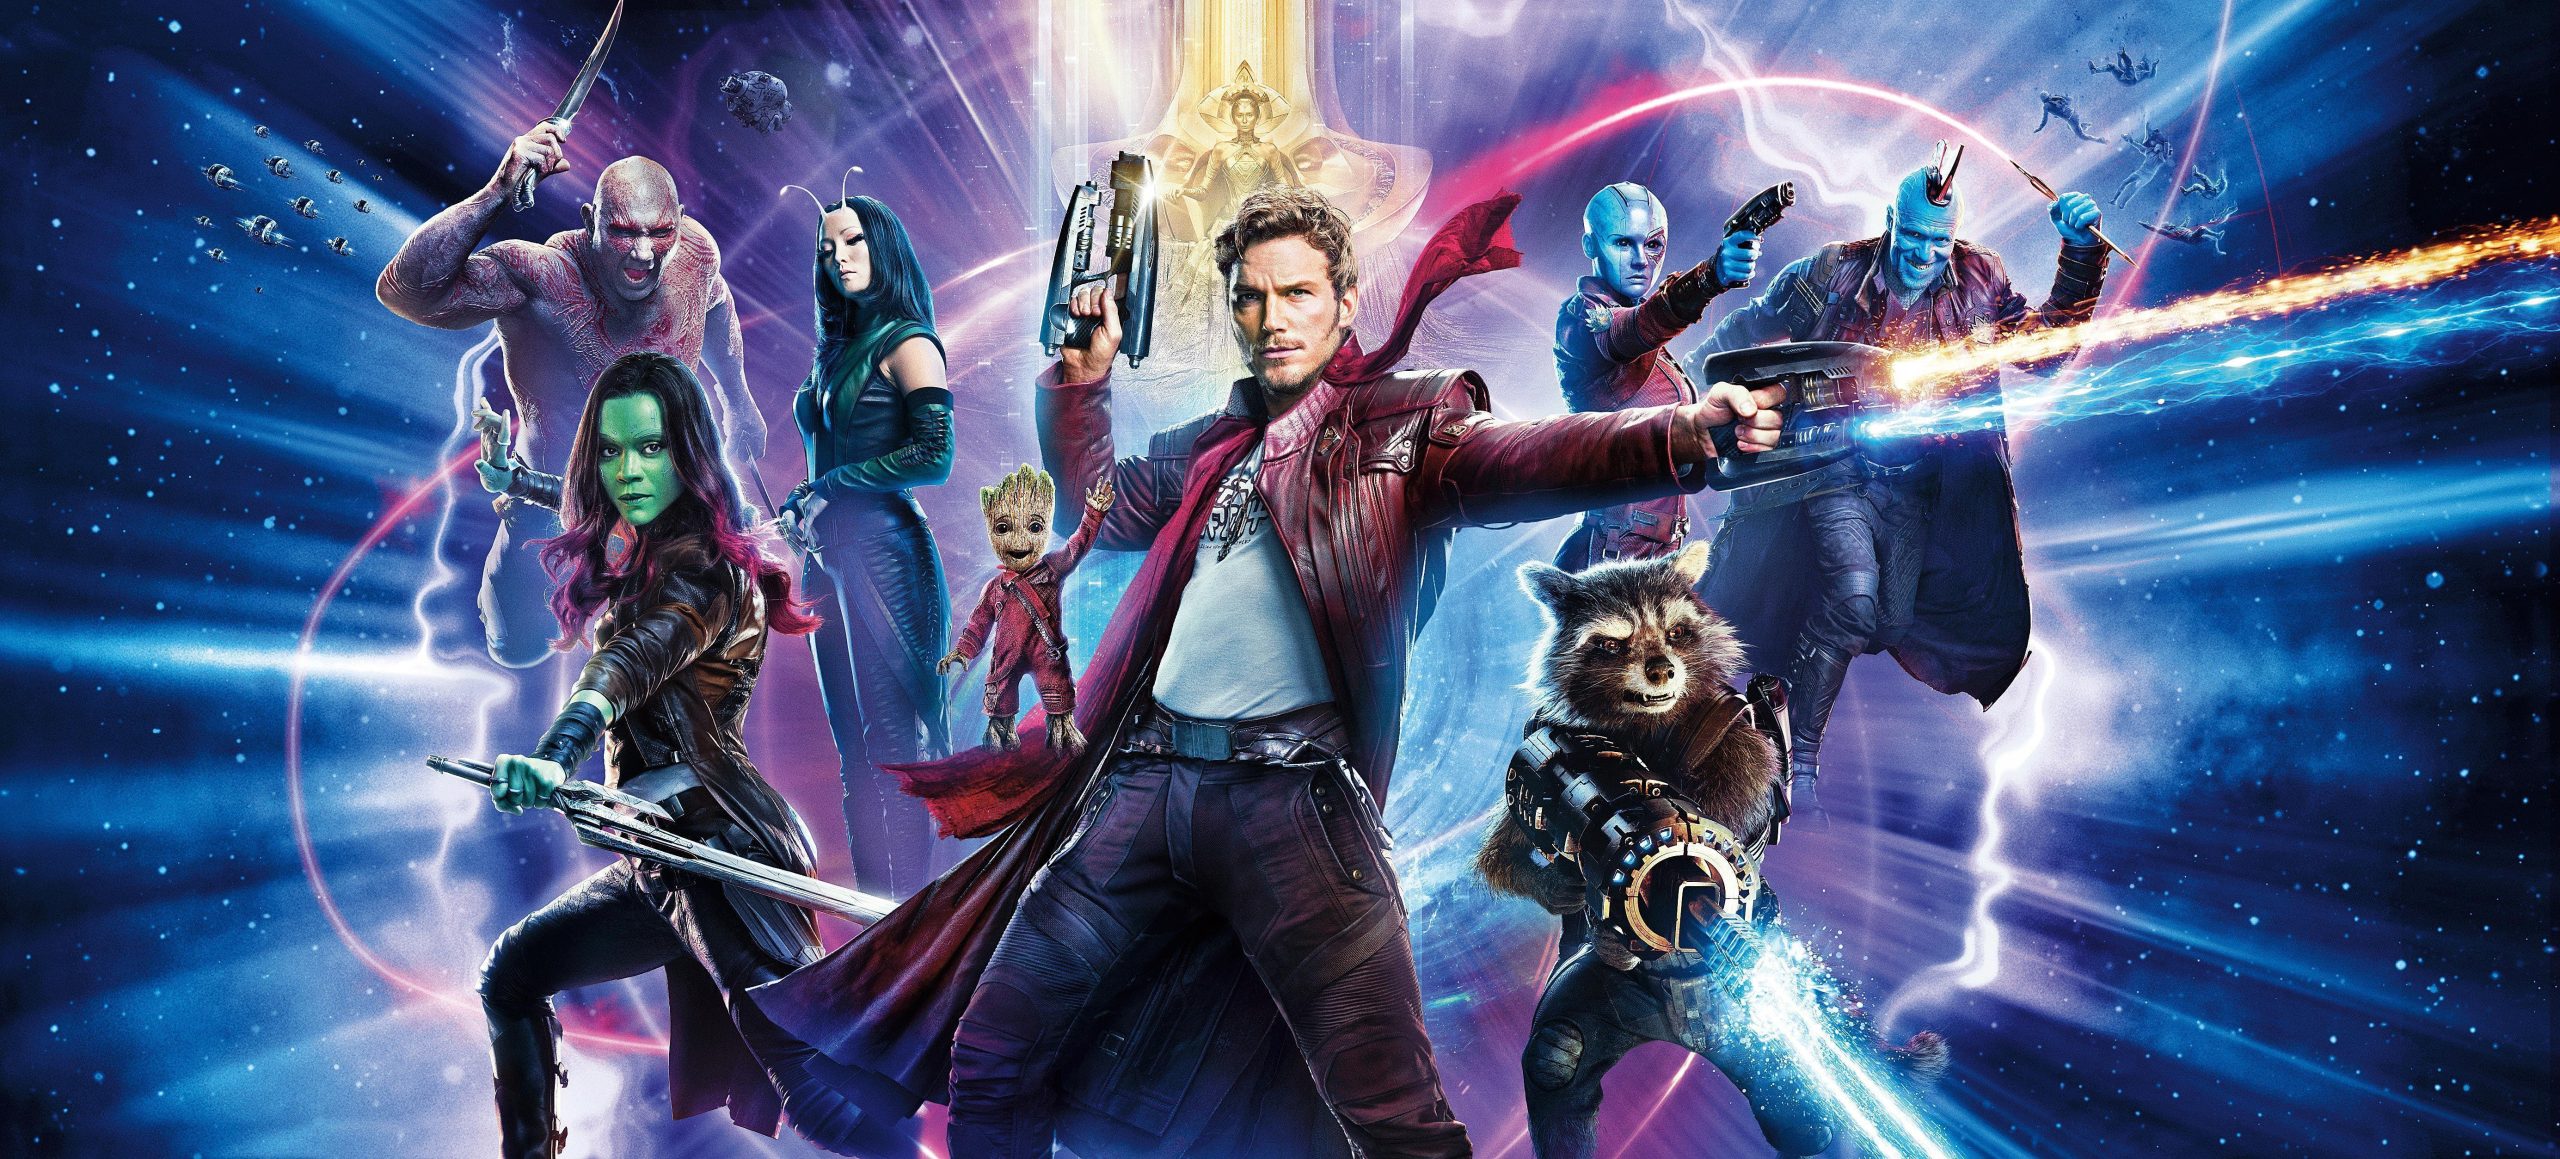 Guardians Of The Galaxy 2 Download Wallpaper